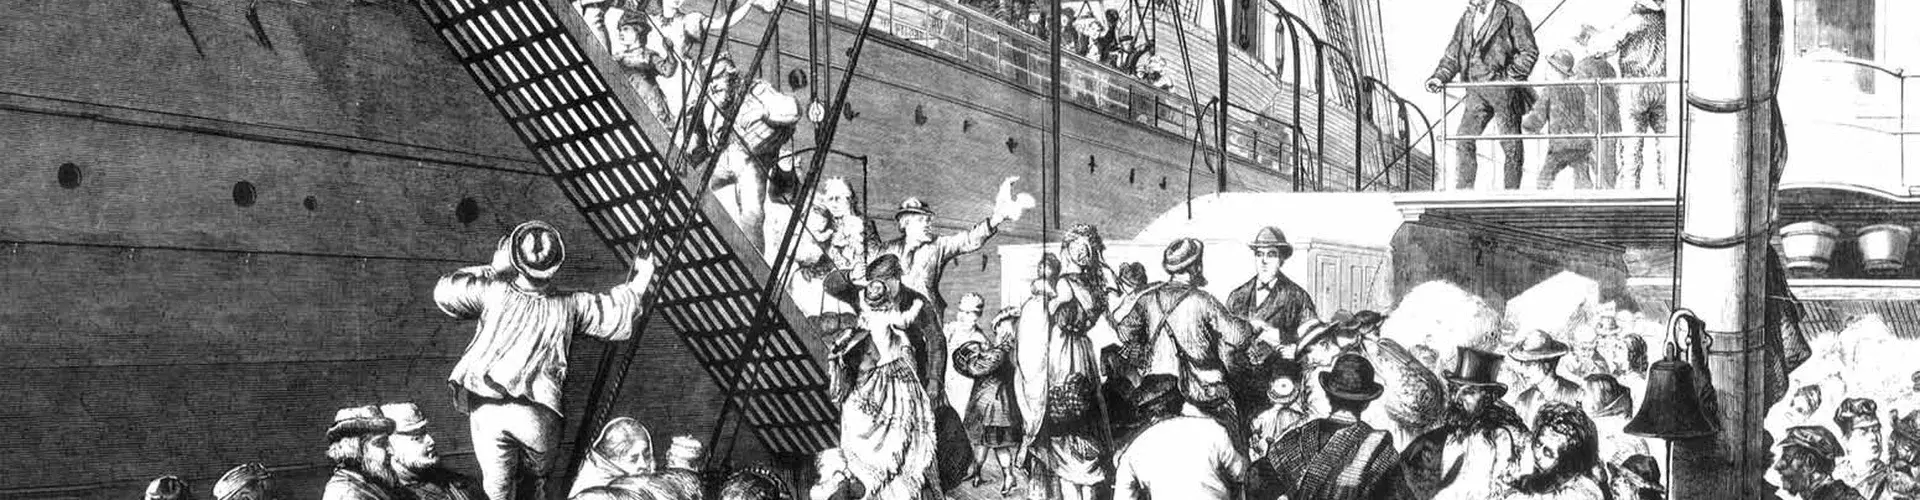 Illustration from 1874 showing German emigrants boarding a ship in Hamburg on their way to America